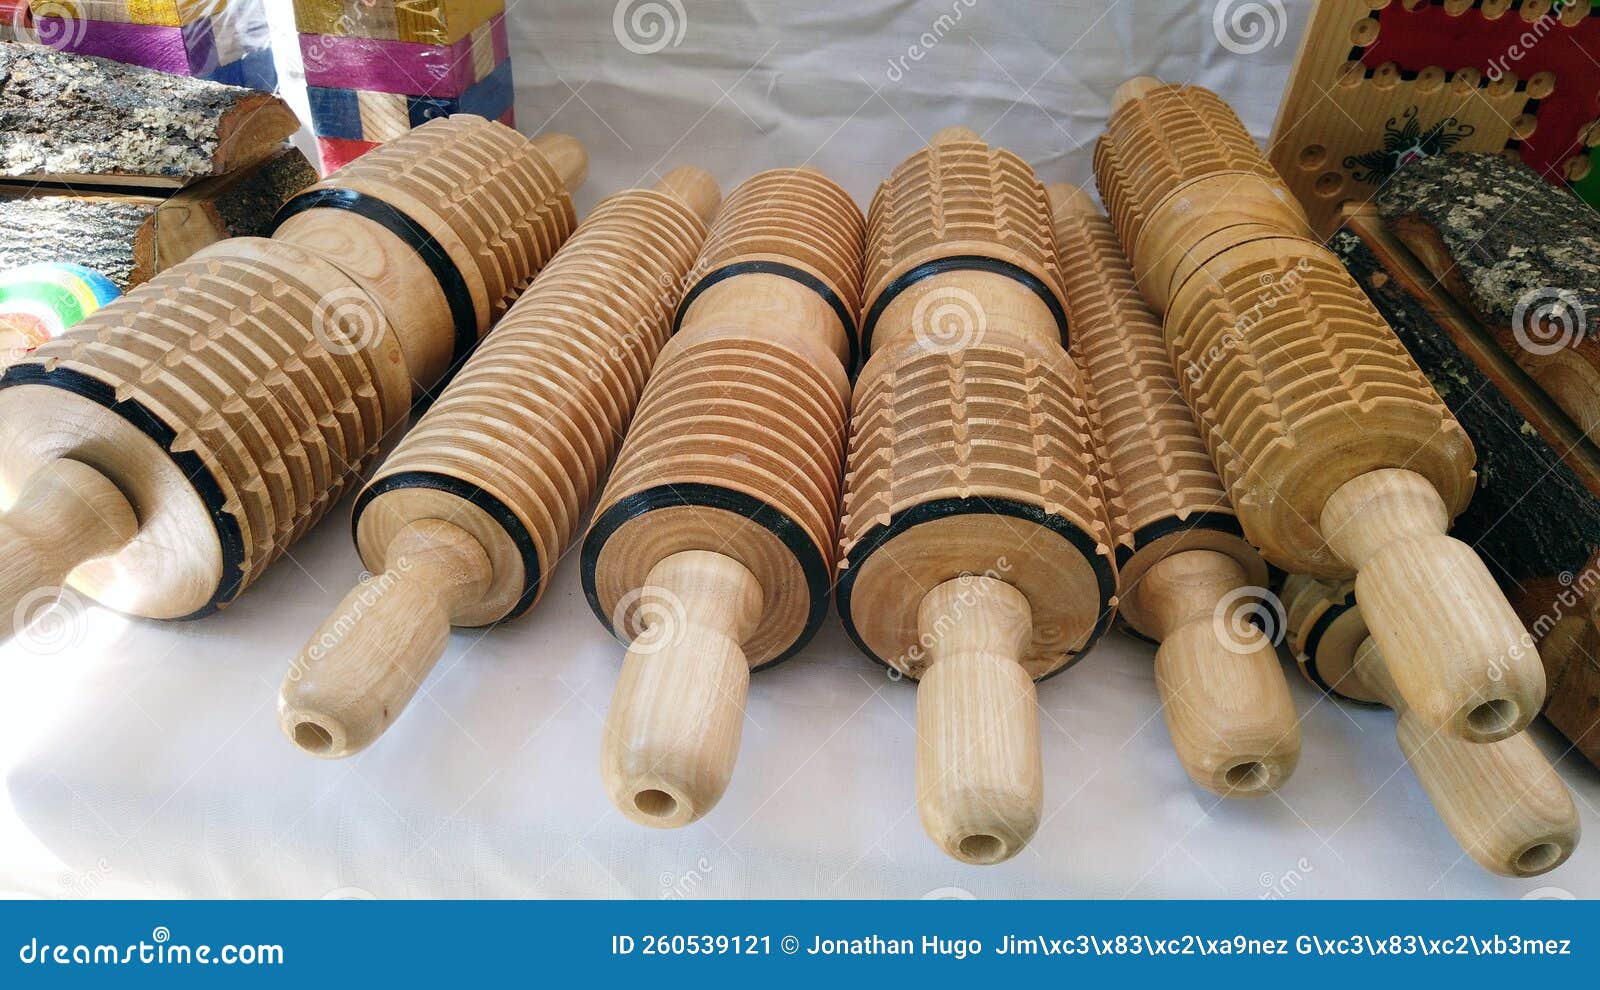 body massage rollers